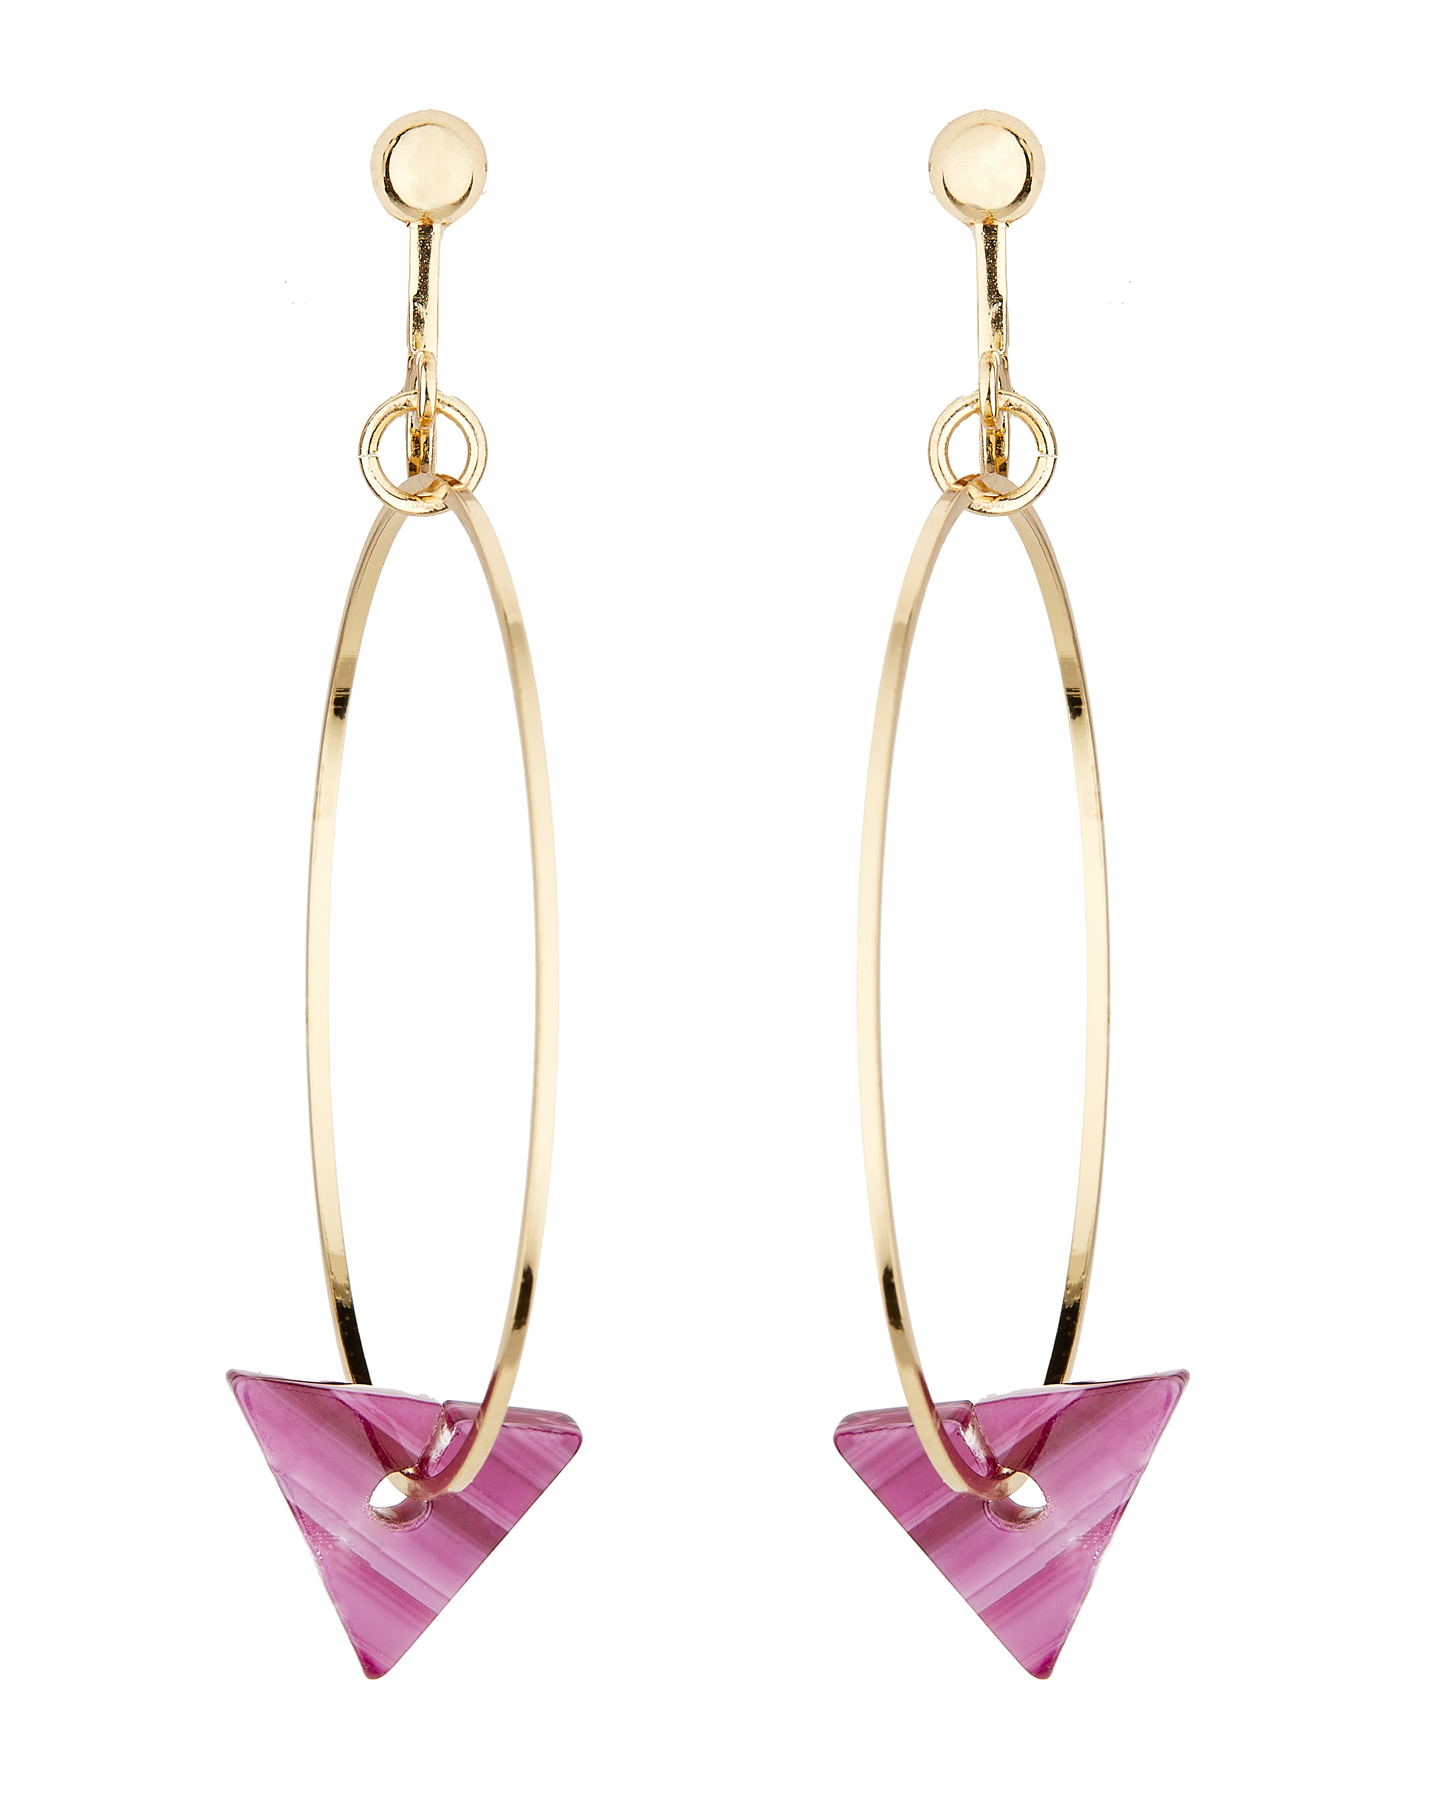 Clip On Hoop Earrings - Elda P - gold hoops with a pink acrylic triangle